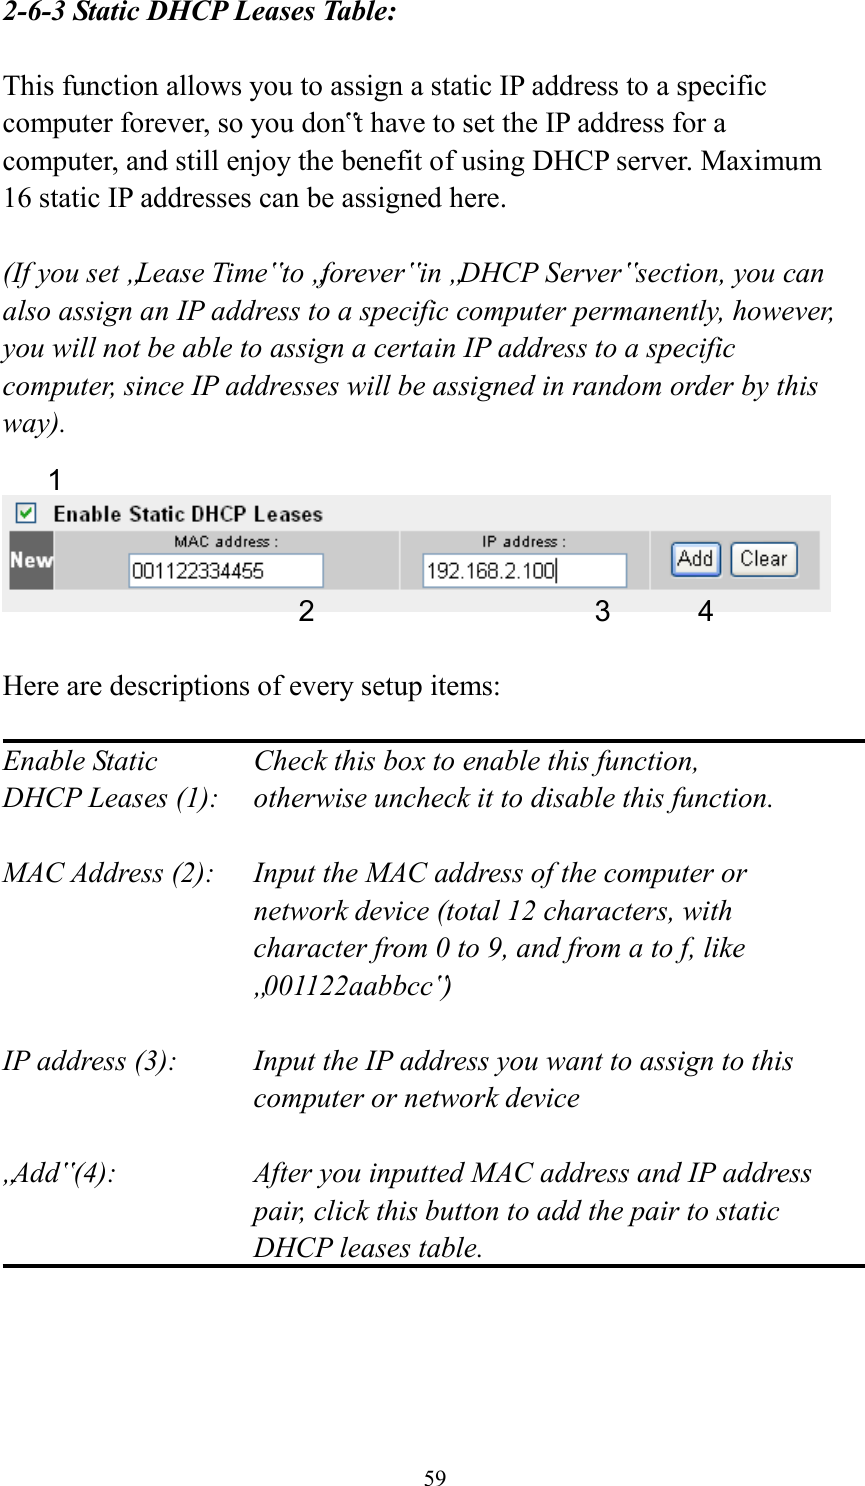  59 2-6-3 Static DHCP Leases Table:  This function allows you to assign a static IP address to a specific computer forever, so you don‟t have to set the IP address for a computer, and still enjoy the benefit of using DHCP server. Maximum 16 static IP addresses can be assigned here.  (If you set „Lease Time‟ to „forever‟ in „DHCP Server‟ section, you can also assign an IP address to a specific computer permanently, however, you will not be able to assign a certain IP address to a specific computer, since IP addresses will be assigned in random order by this way).      Here are descriptions of every setup items:  Enable Static      Check this box to enable this function, DHCP Leases (1):    otherwise uncheck it to disable this function.  MAC Address (2):    Input the MAC address of the computer or network device (total 12 characters, with character from 0 to 9, and from a to f, like „001122aabbcc‟)    IP address (3):    Input the IP address you want to assign to this computer or network device    „Add‟ (4):    After you inputted MAC address and IP address pair, click this button to add the pair to static DHCP leases table.     1 2 3 4 